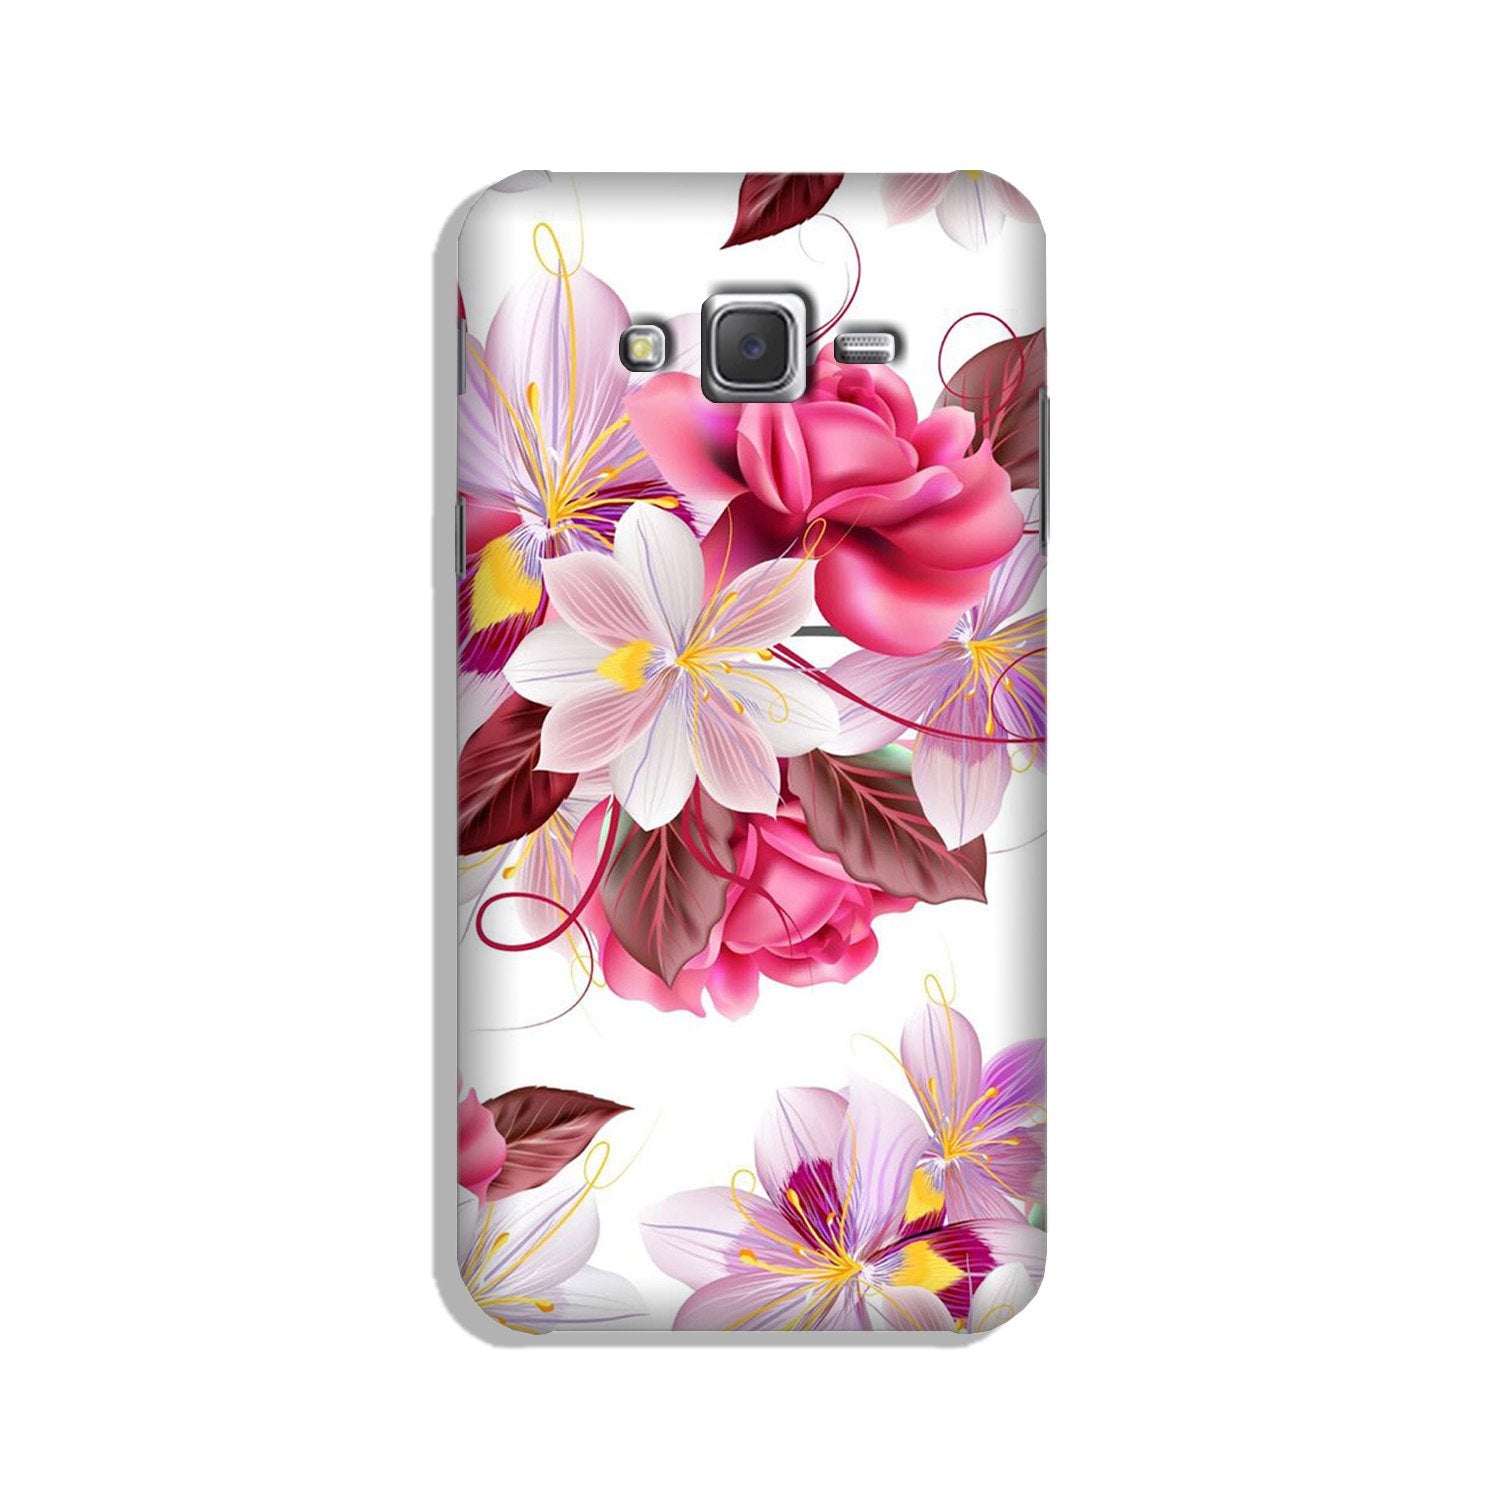 Beautiful flowers Case for Galaxy J2 (2015)